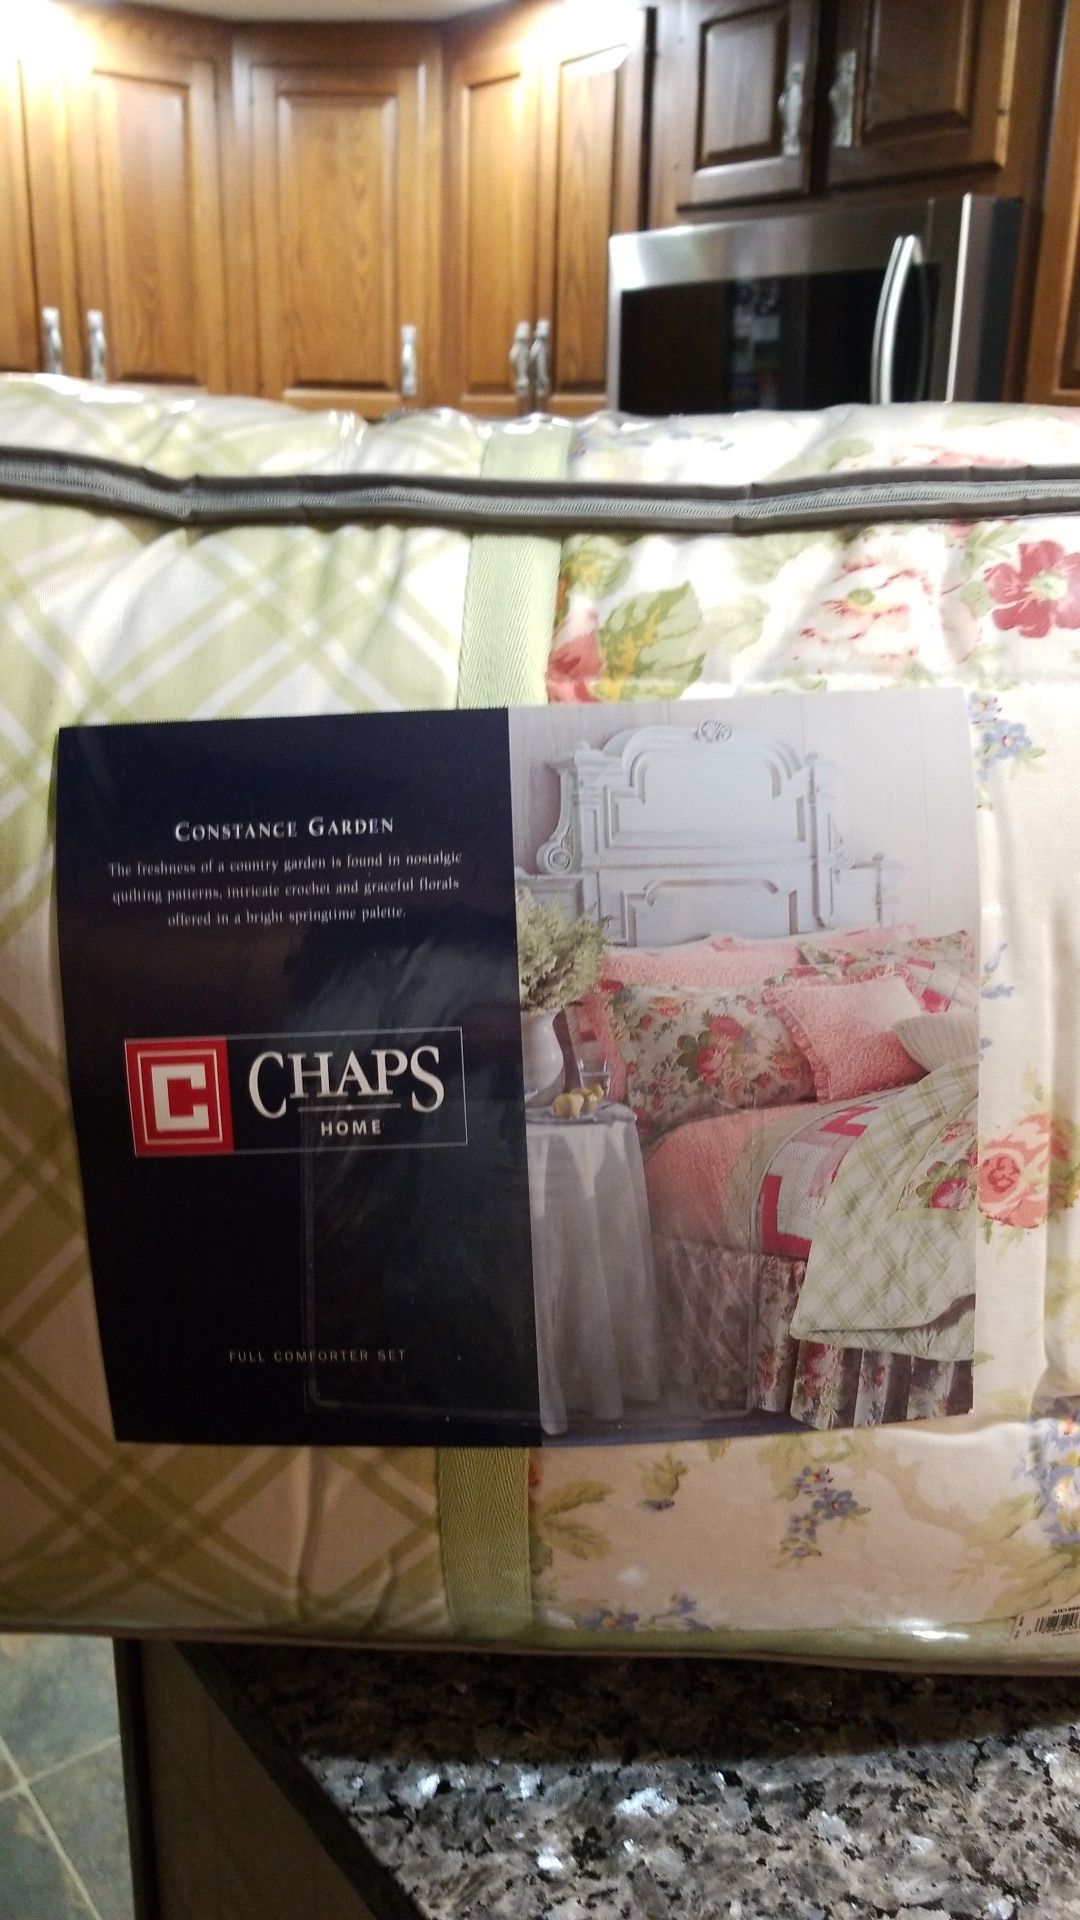 Sale Chaps new full comforter set paid $220 asking $40!